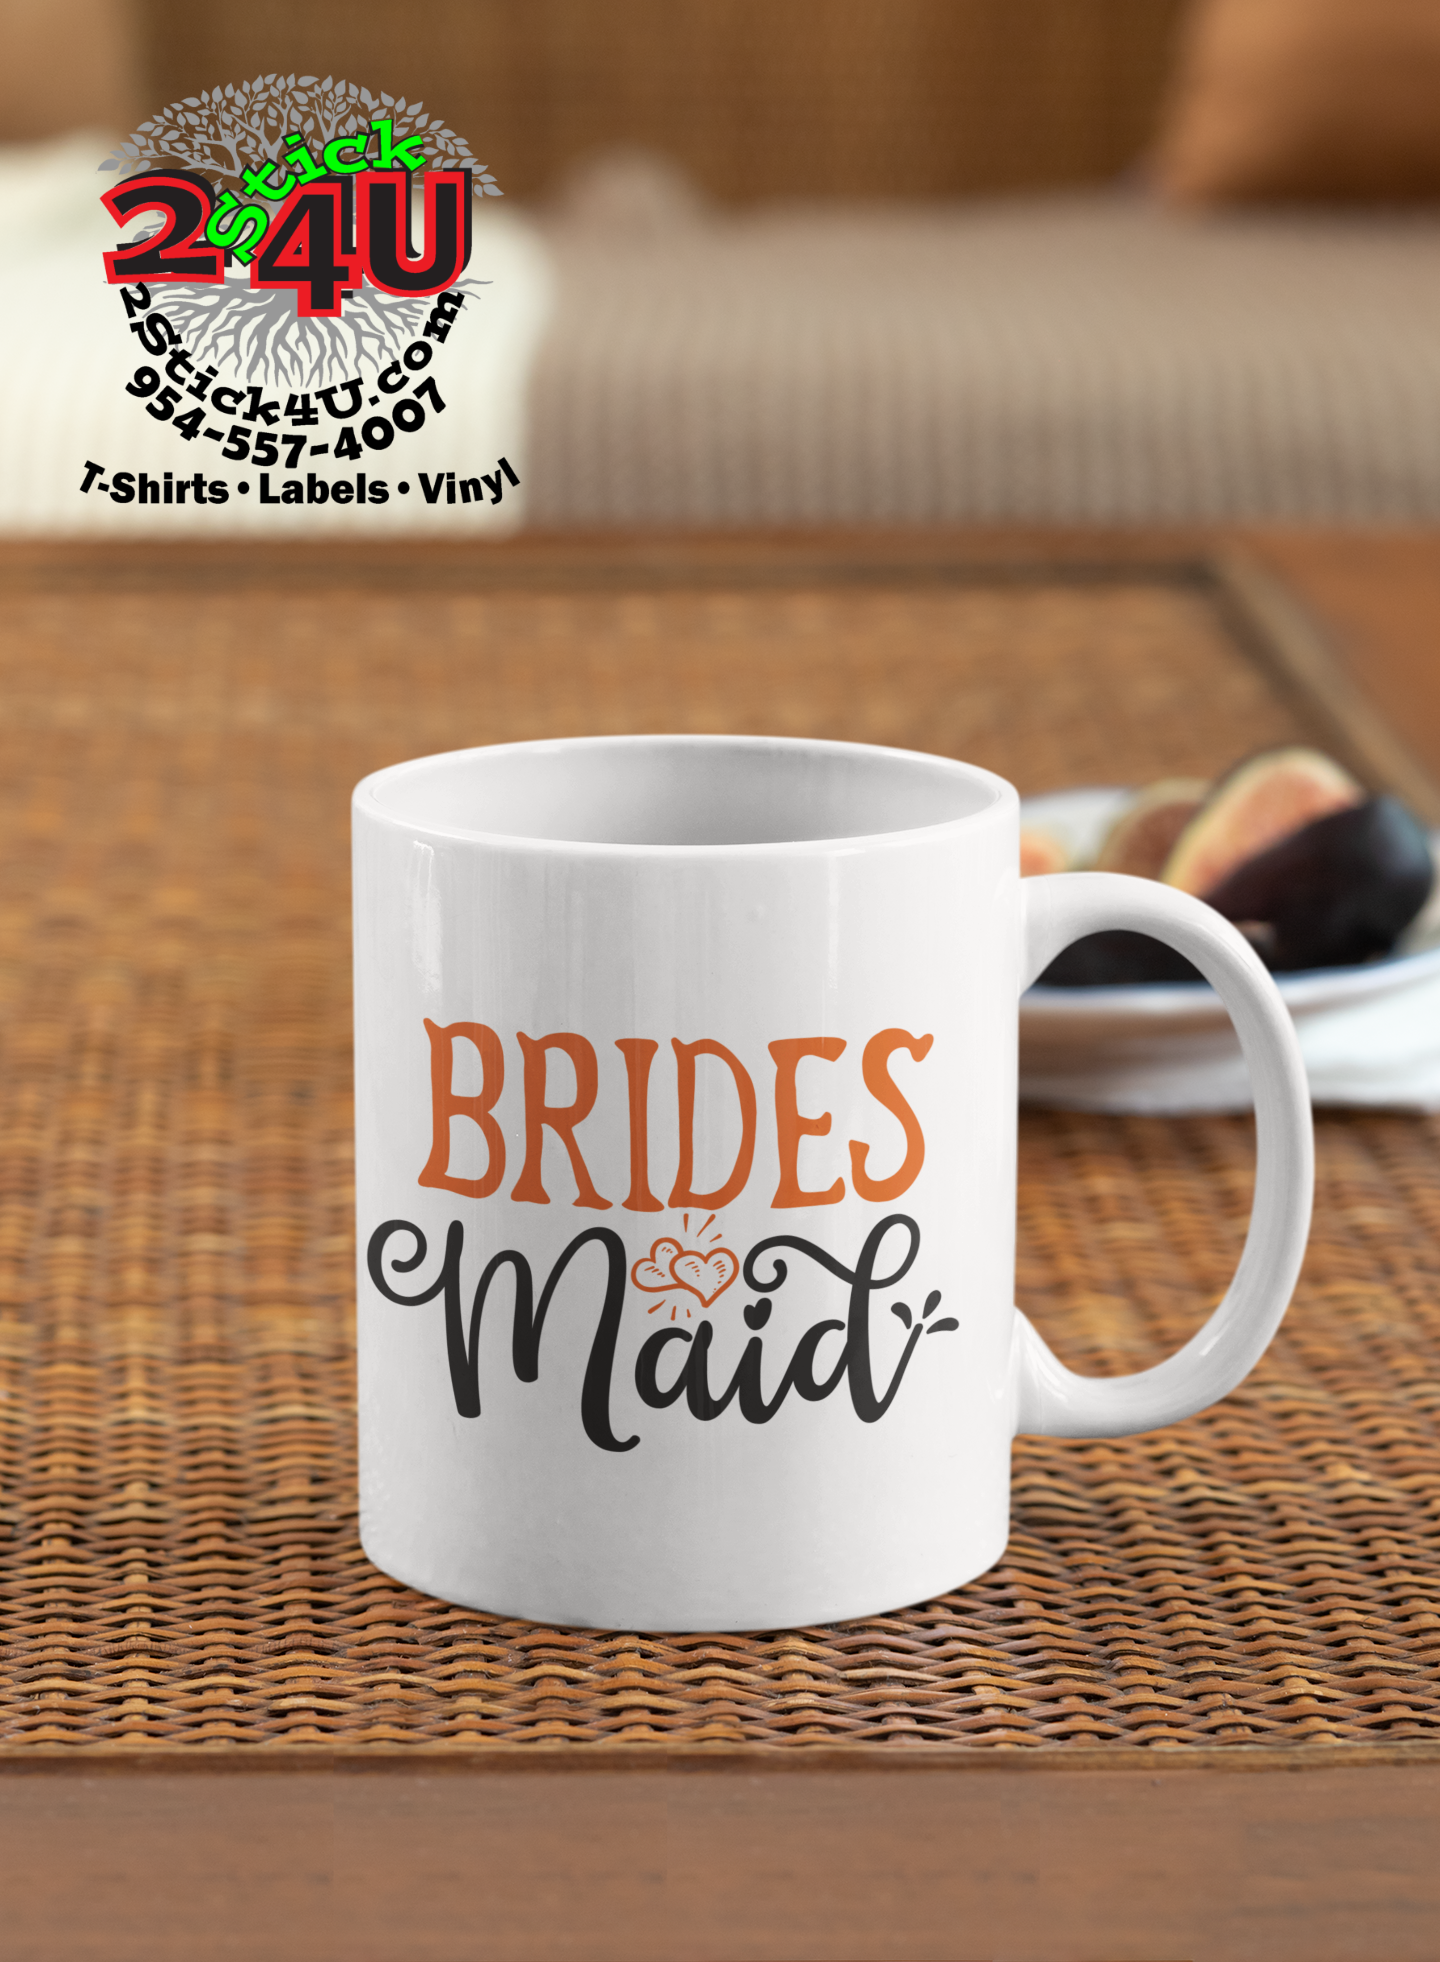 Wedding - Brides Maid Coffee Mug - Home of Buy 3, Get 1 Free. Long Lasting Custom Designed Coffee Mugs for Business and Pleasure. Perfect for Christmas, Housewarming, Wedding Party gifts